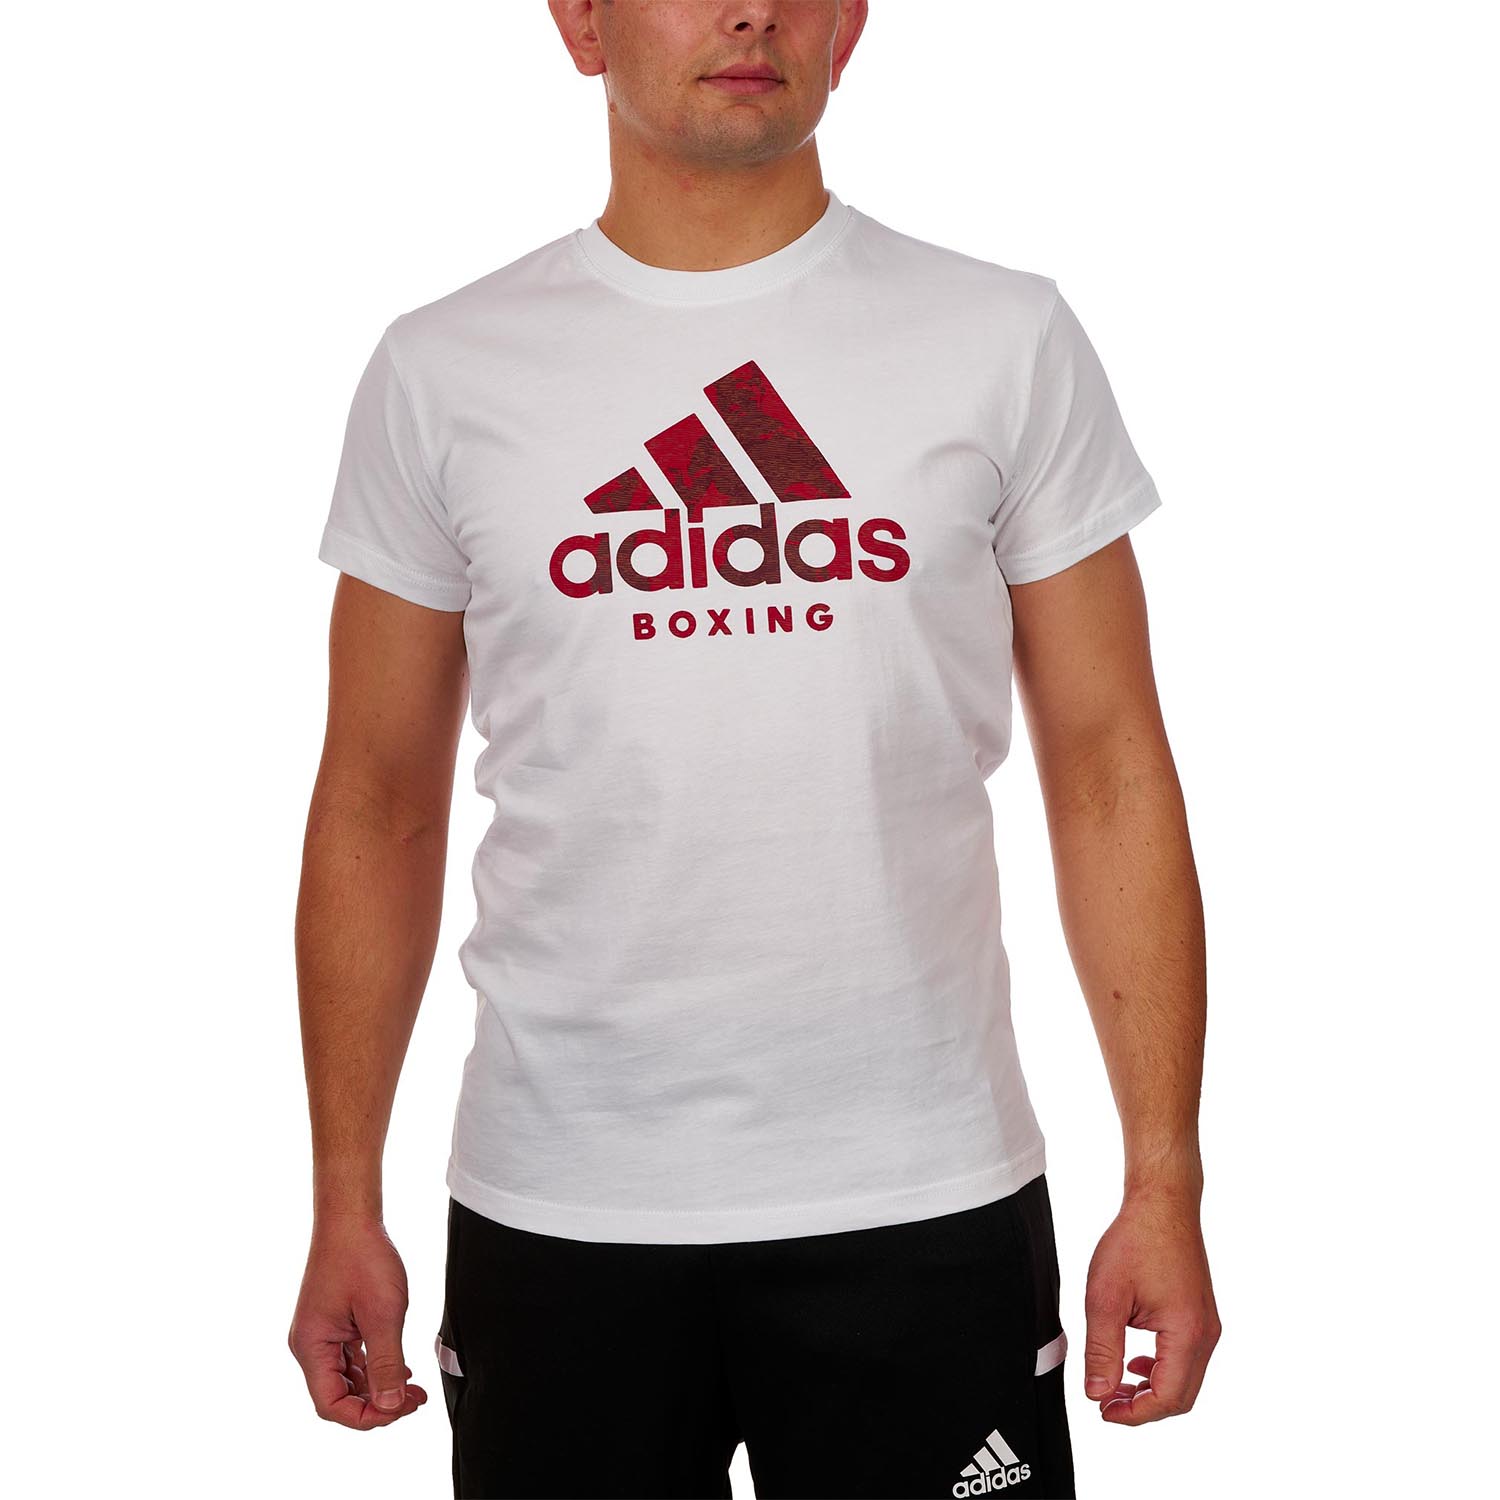 adidas T-Shirt, Badge Of Sport, Boxing, weiß